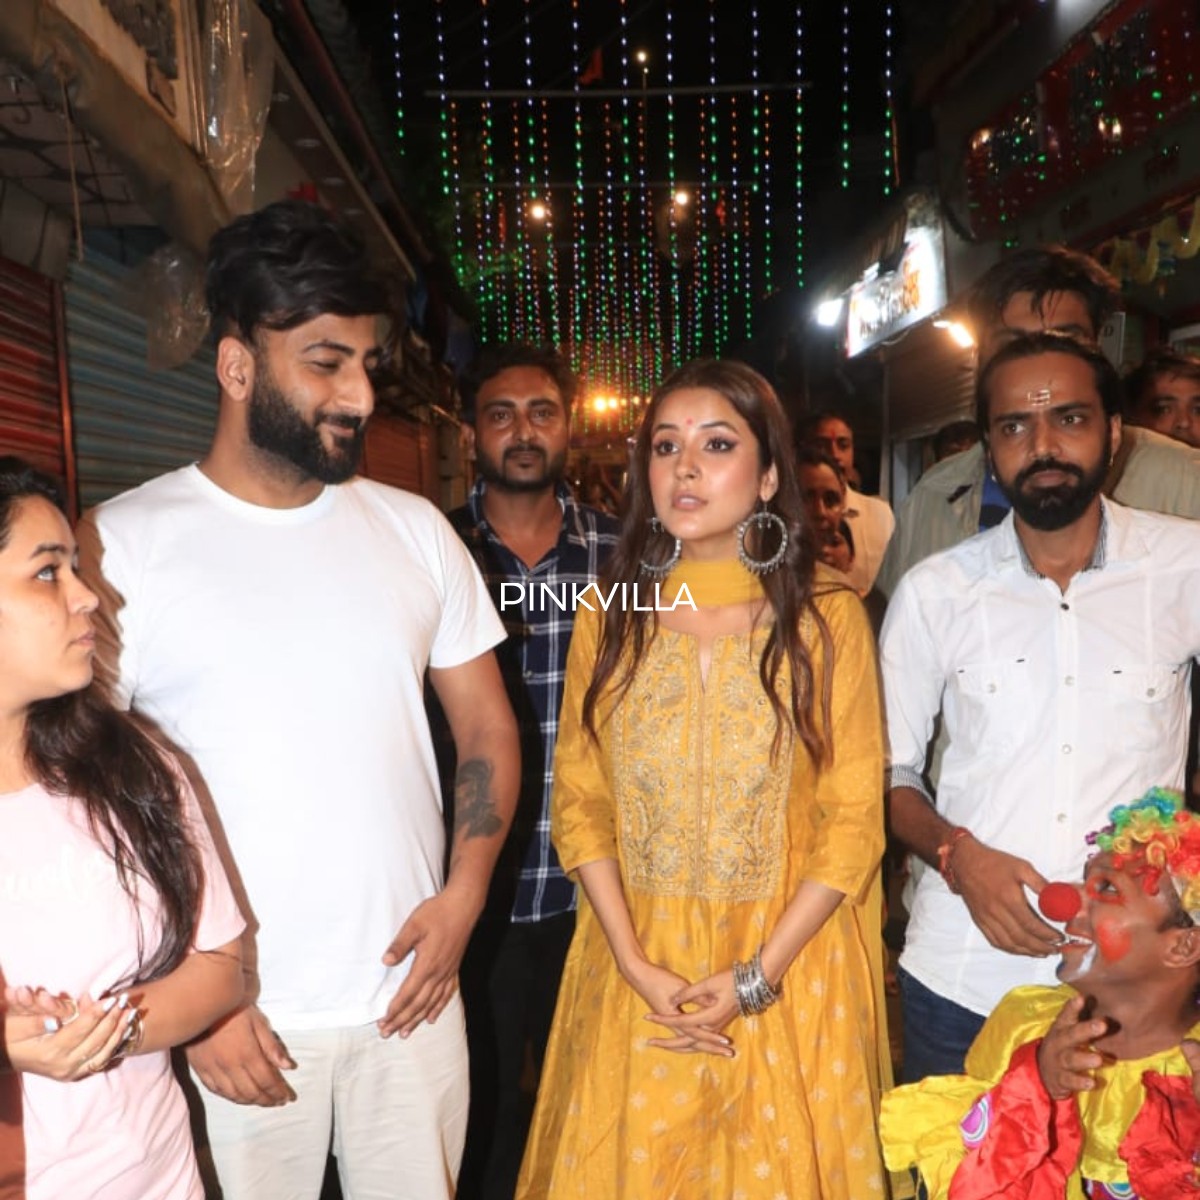 Shehnaaz Gill looks pretty in yellow suit as she visits Lalbaugcha Raja in Mumbai; Brother Shehbaz joins